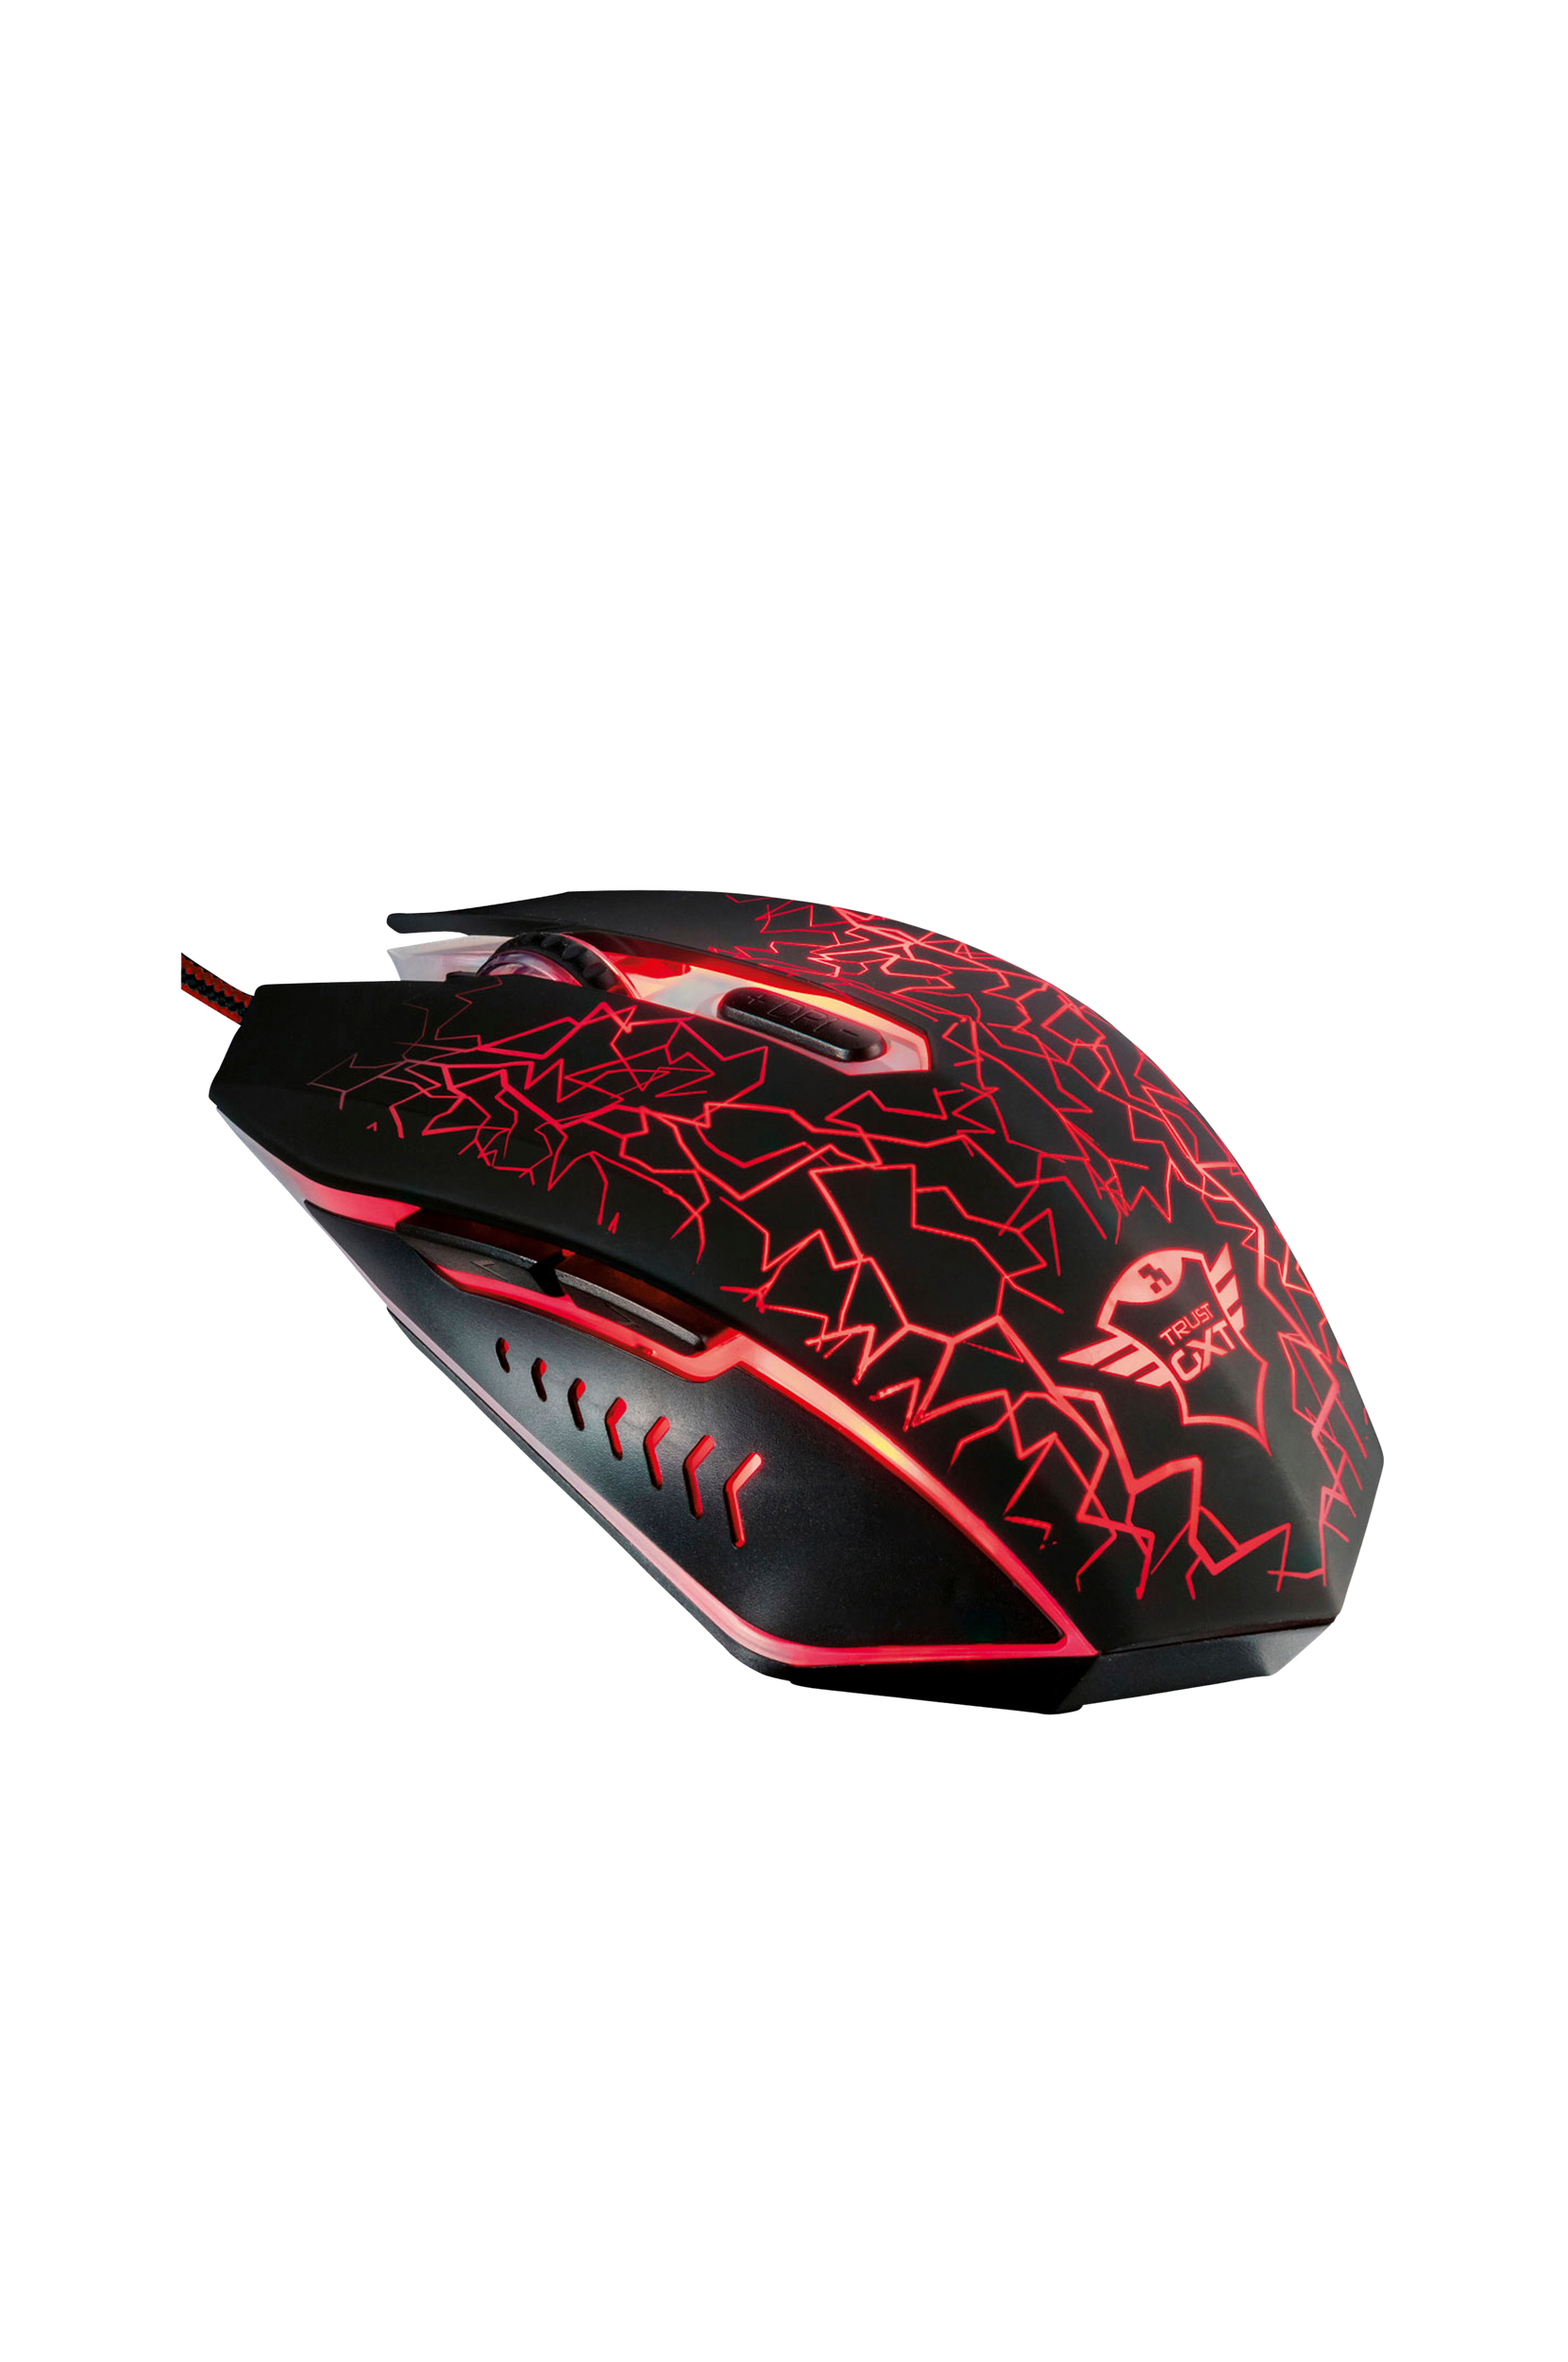 Gxt 105 Gaming Mouse, Trust